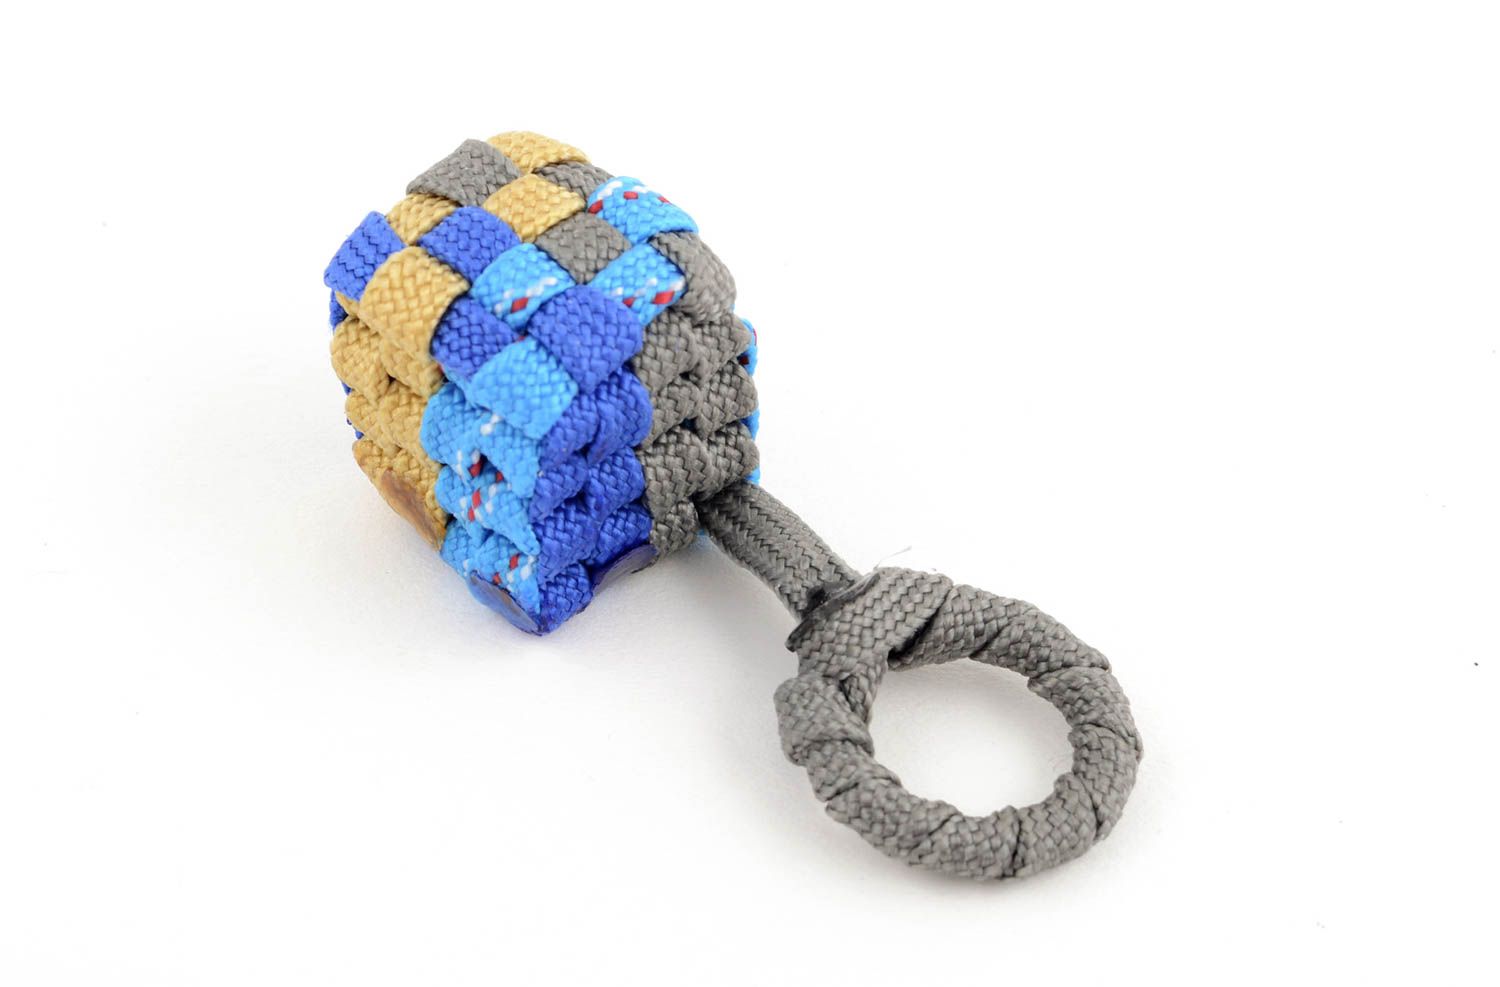 Handmade paracord key fob key accessories cool gifts hiking equipment photo 4